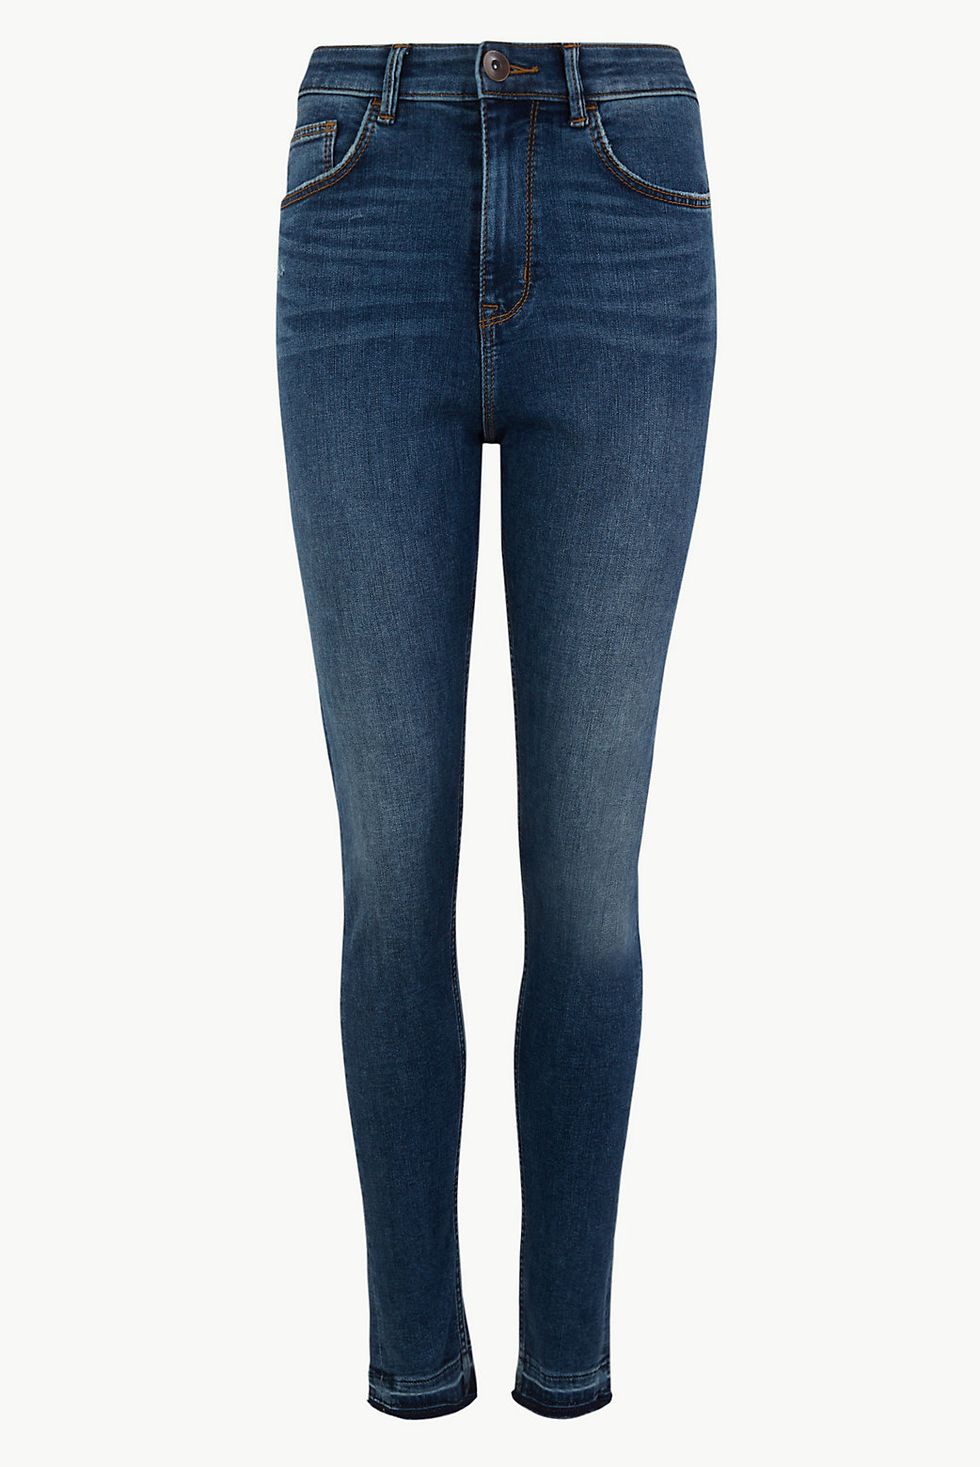 Marks & Spencer's super soft jeans with 